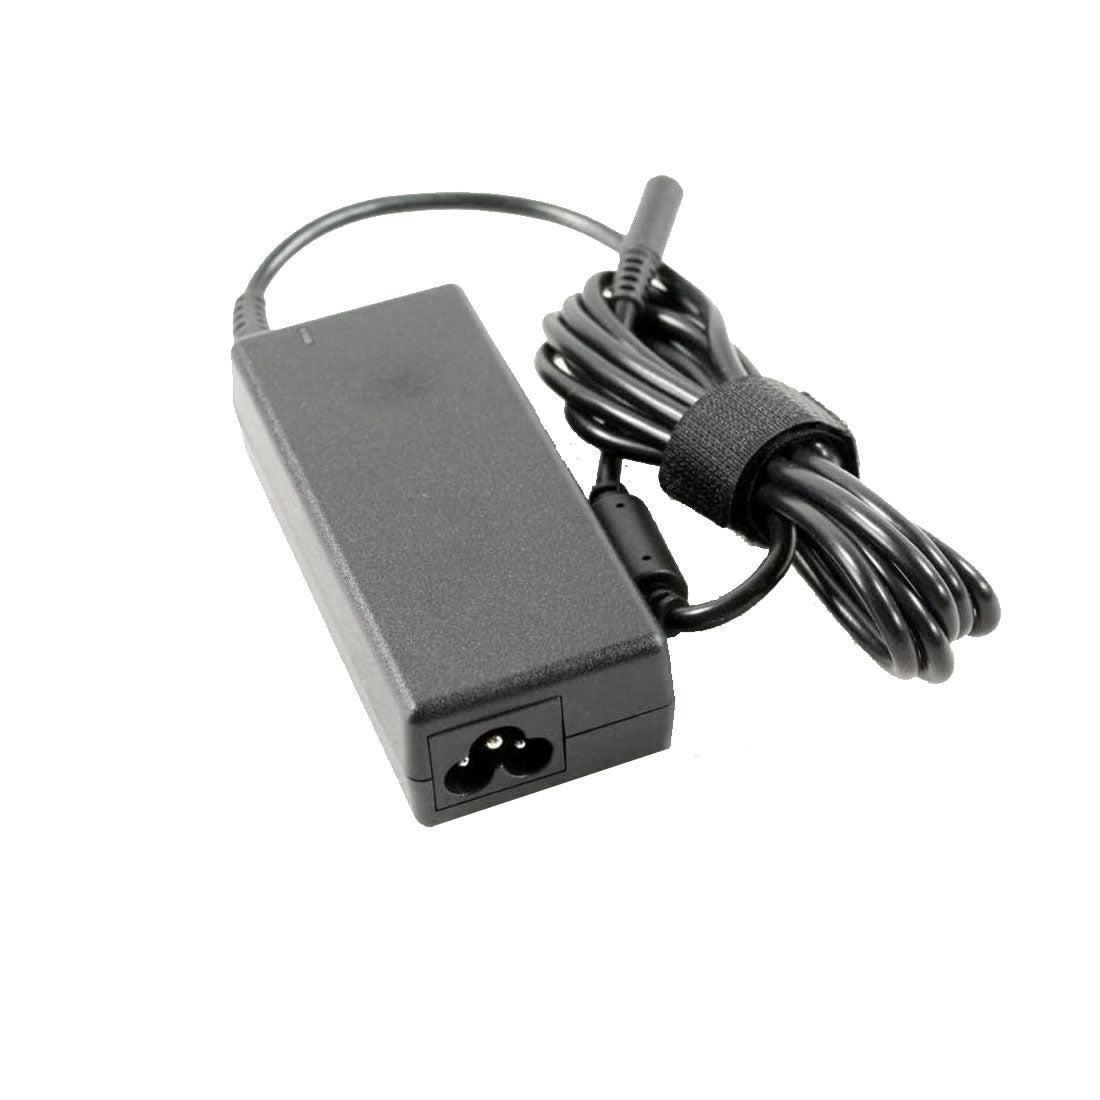 Dell Original 65W 19.5V 4.5mm Pin Laptop Charger Adapter for Vostro 15 3562 With Power Cord